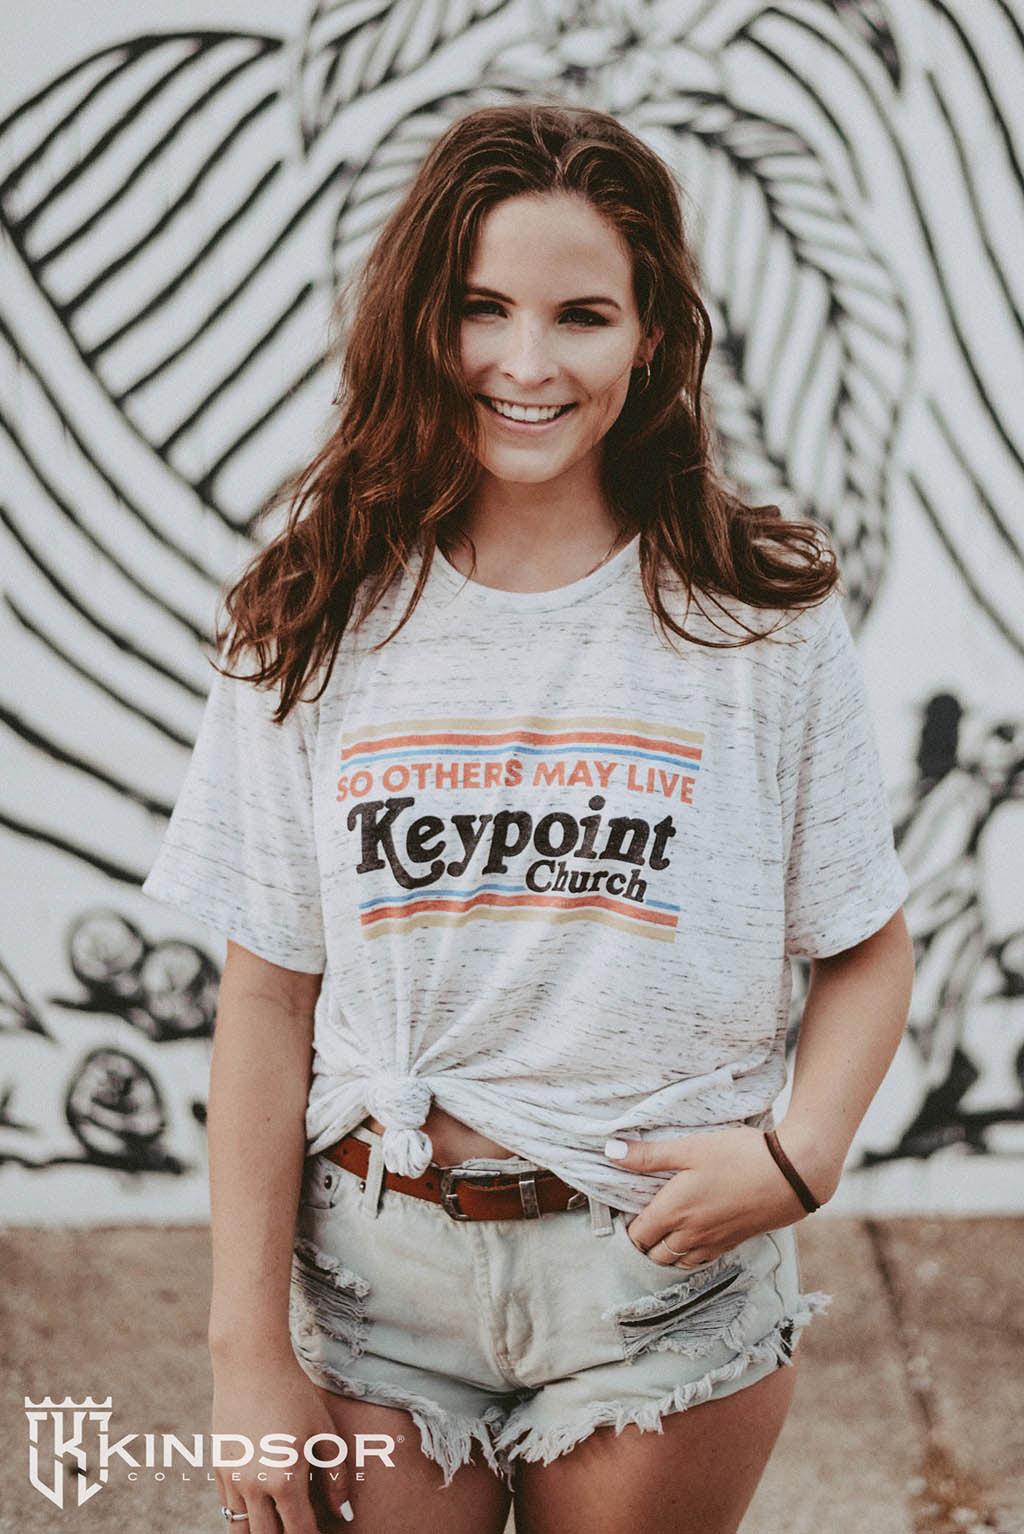 Keypoint Church &quot;So Others May Live&quot; Tshirt